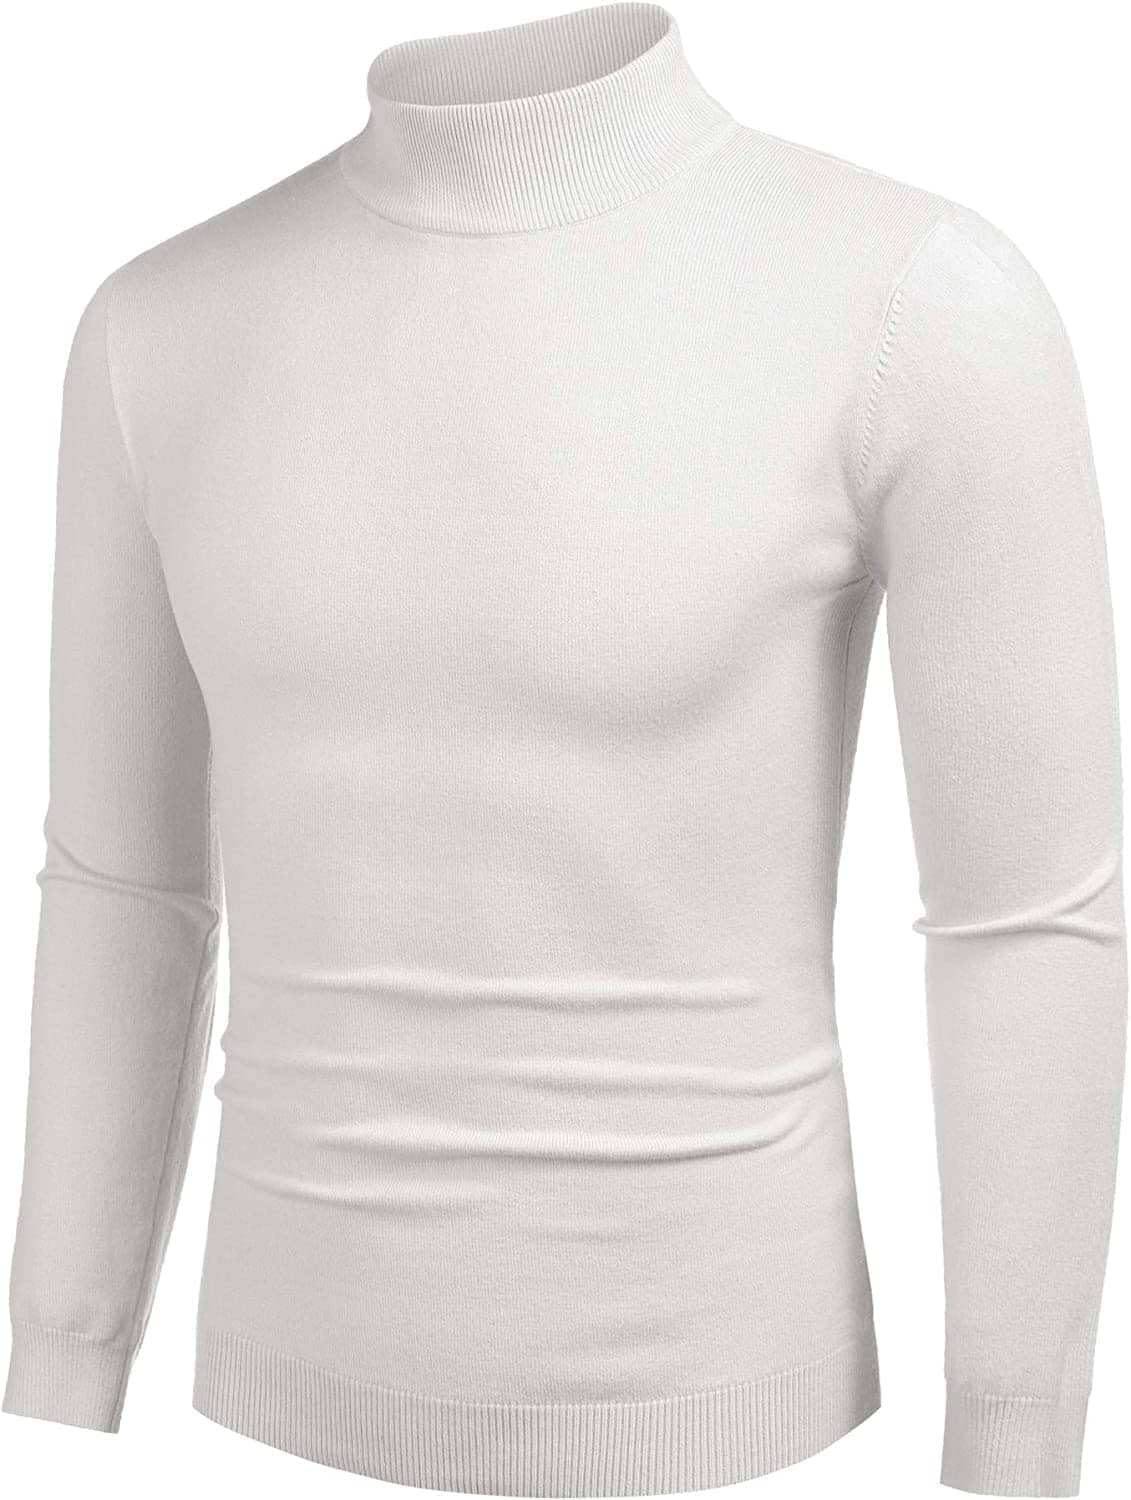 Turtleneck Pullover Basic Knitted Thermal Sweaters (US Only) Sweaters COOFANDY Store White S 